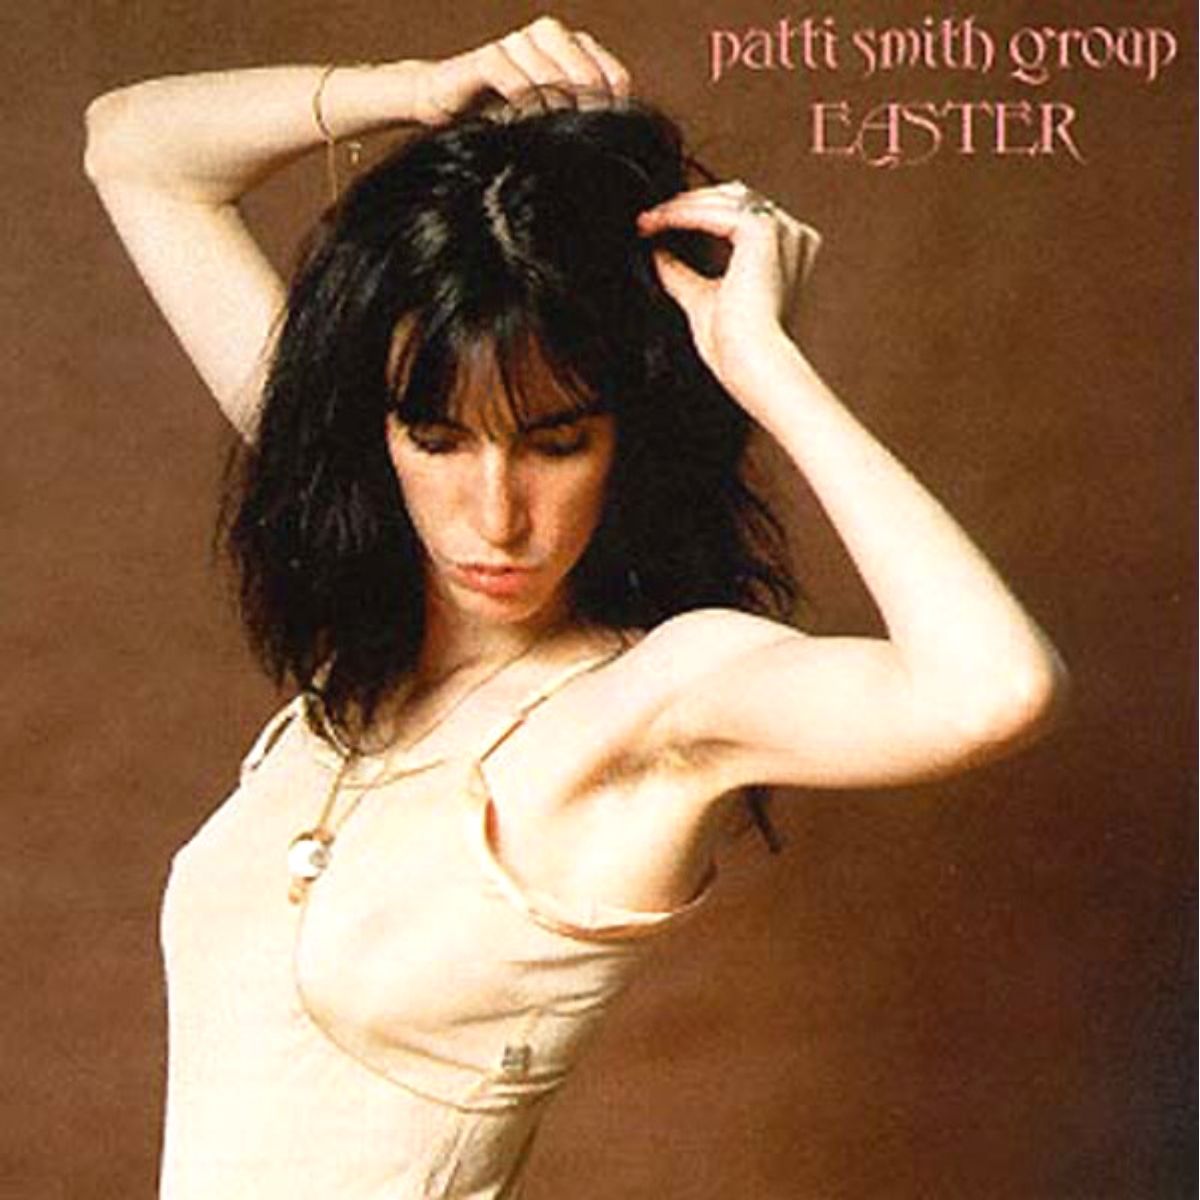 «Patti Smith Group» – обложка альбома «Easter»